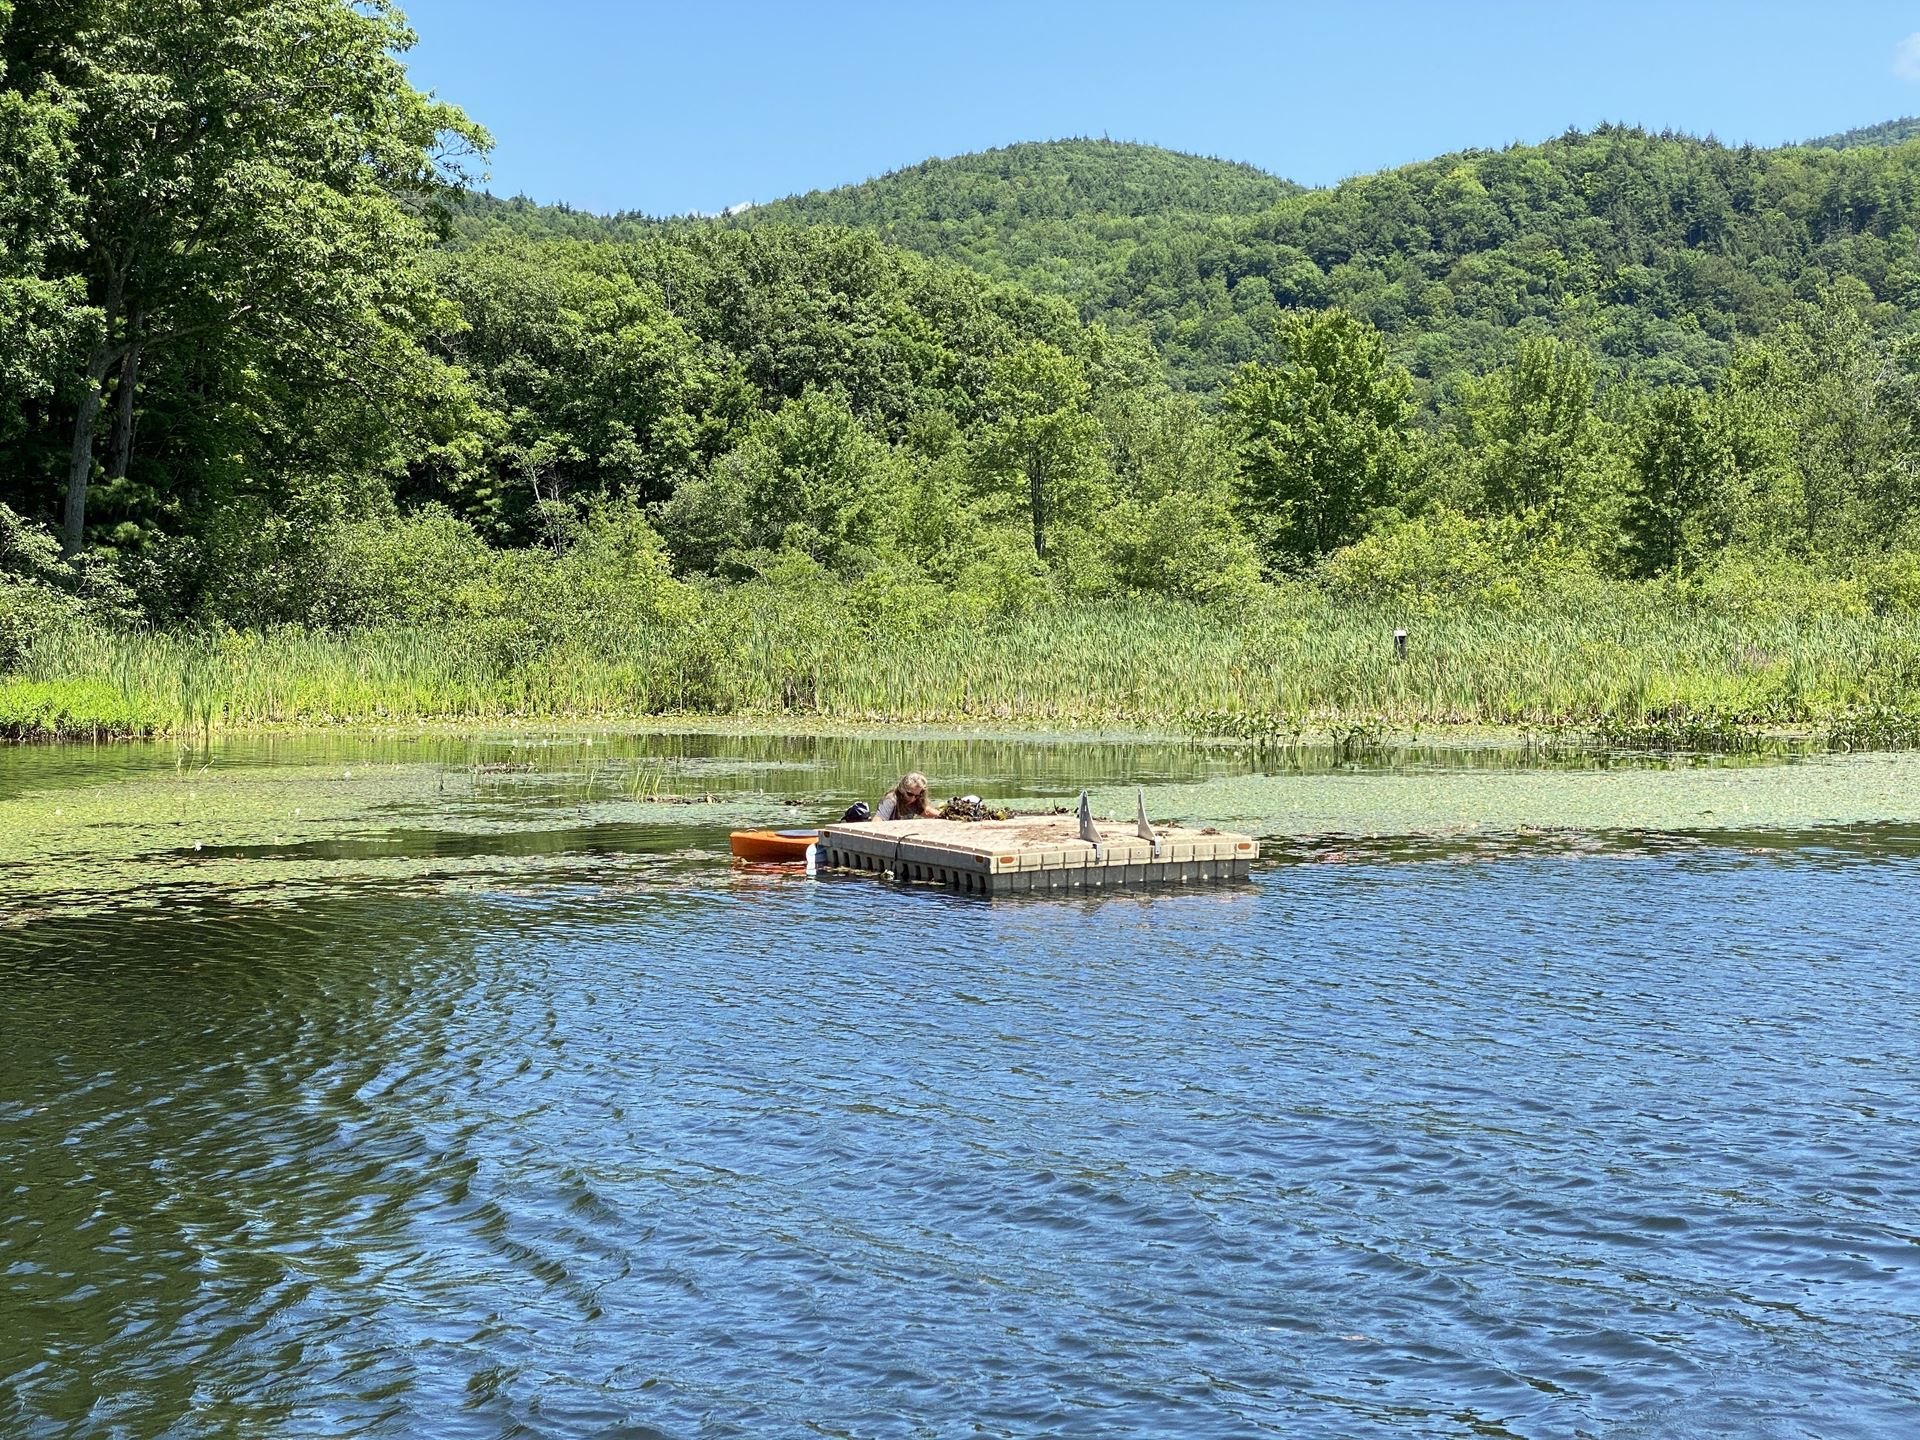 Milfoil collection platform set up in the Channel